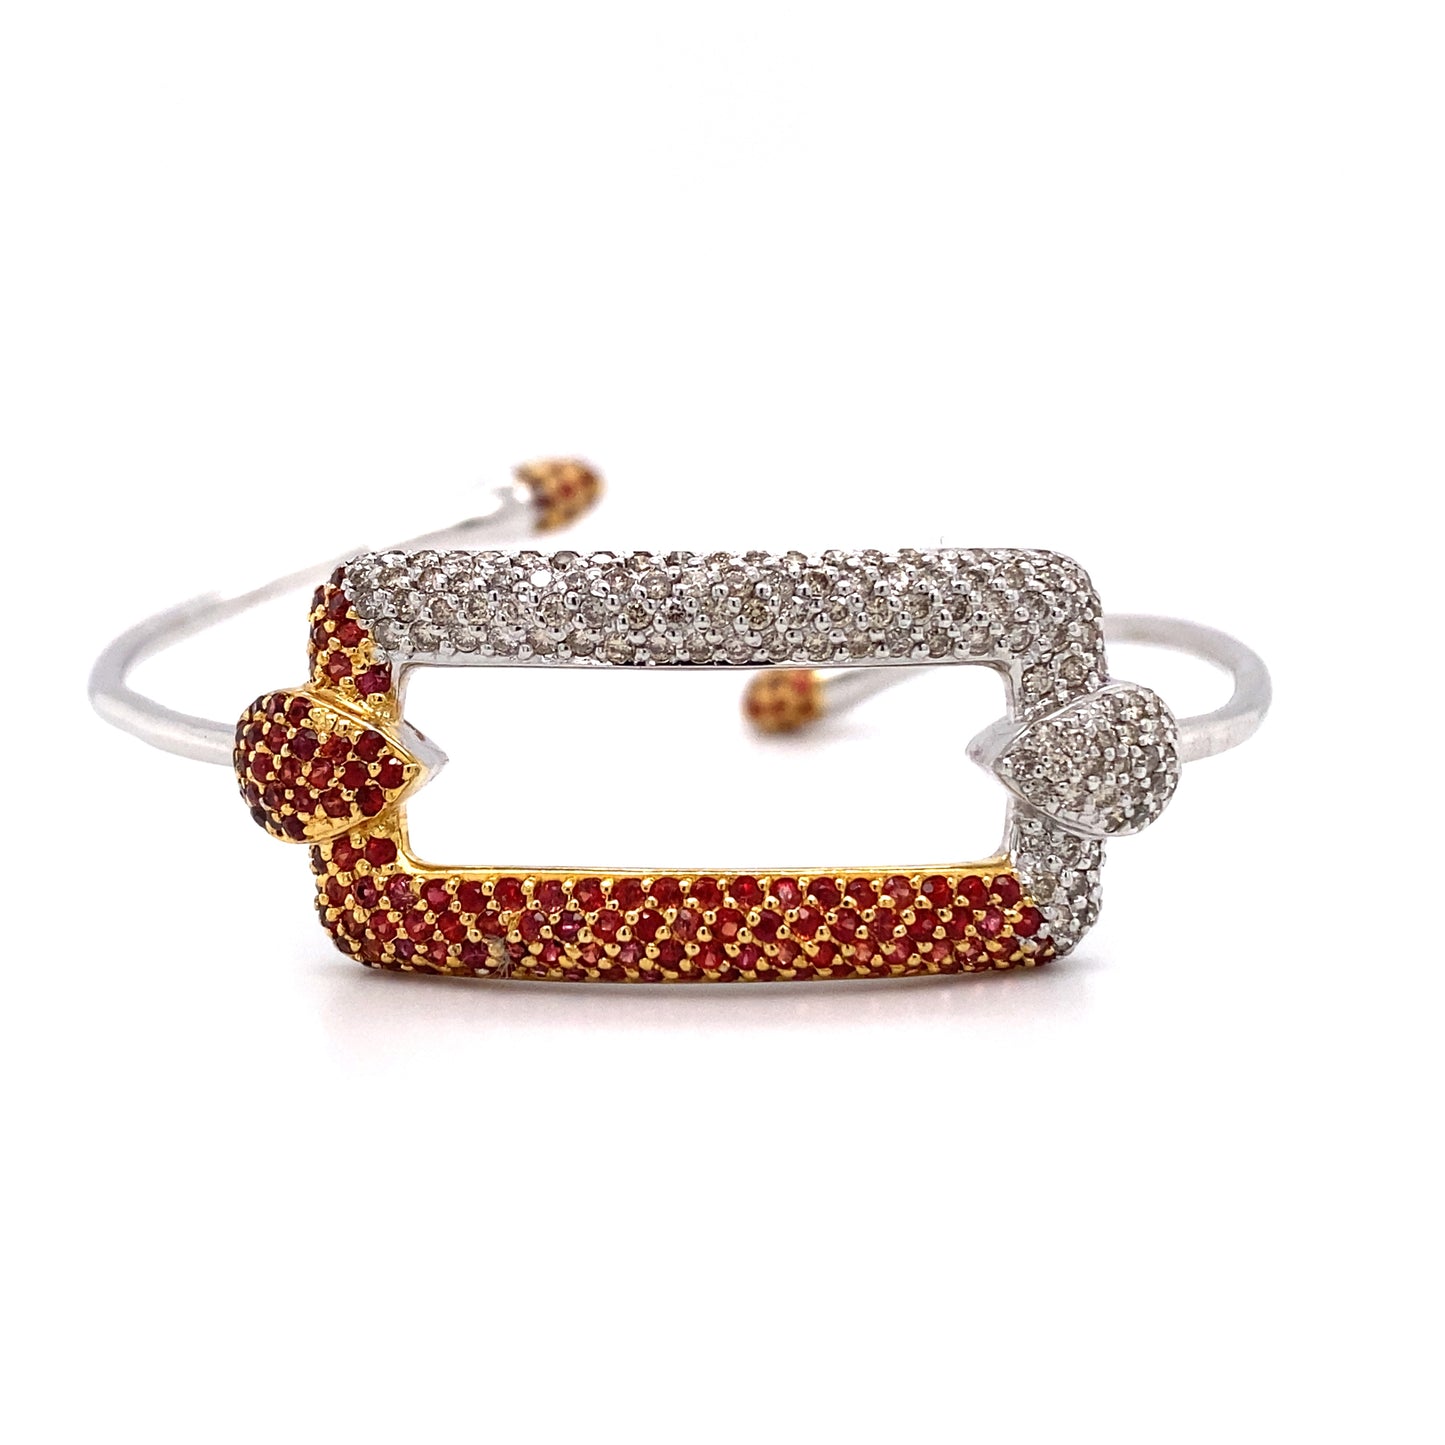 Circa 1980s Ruby and Diamond Adjustable Cuff Bracelet in Two Tone 18K White Gold